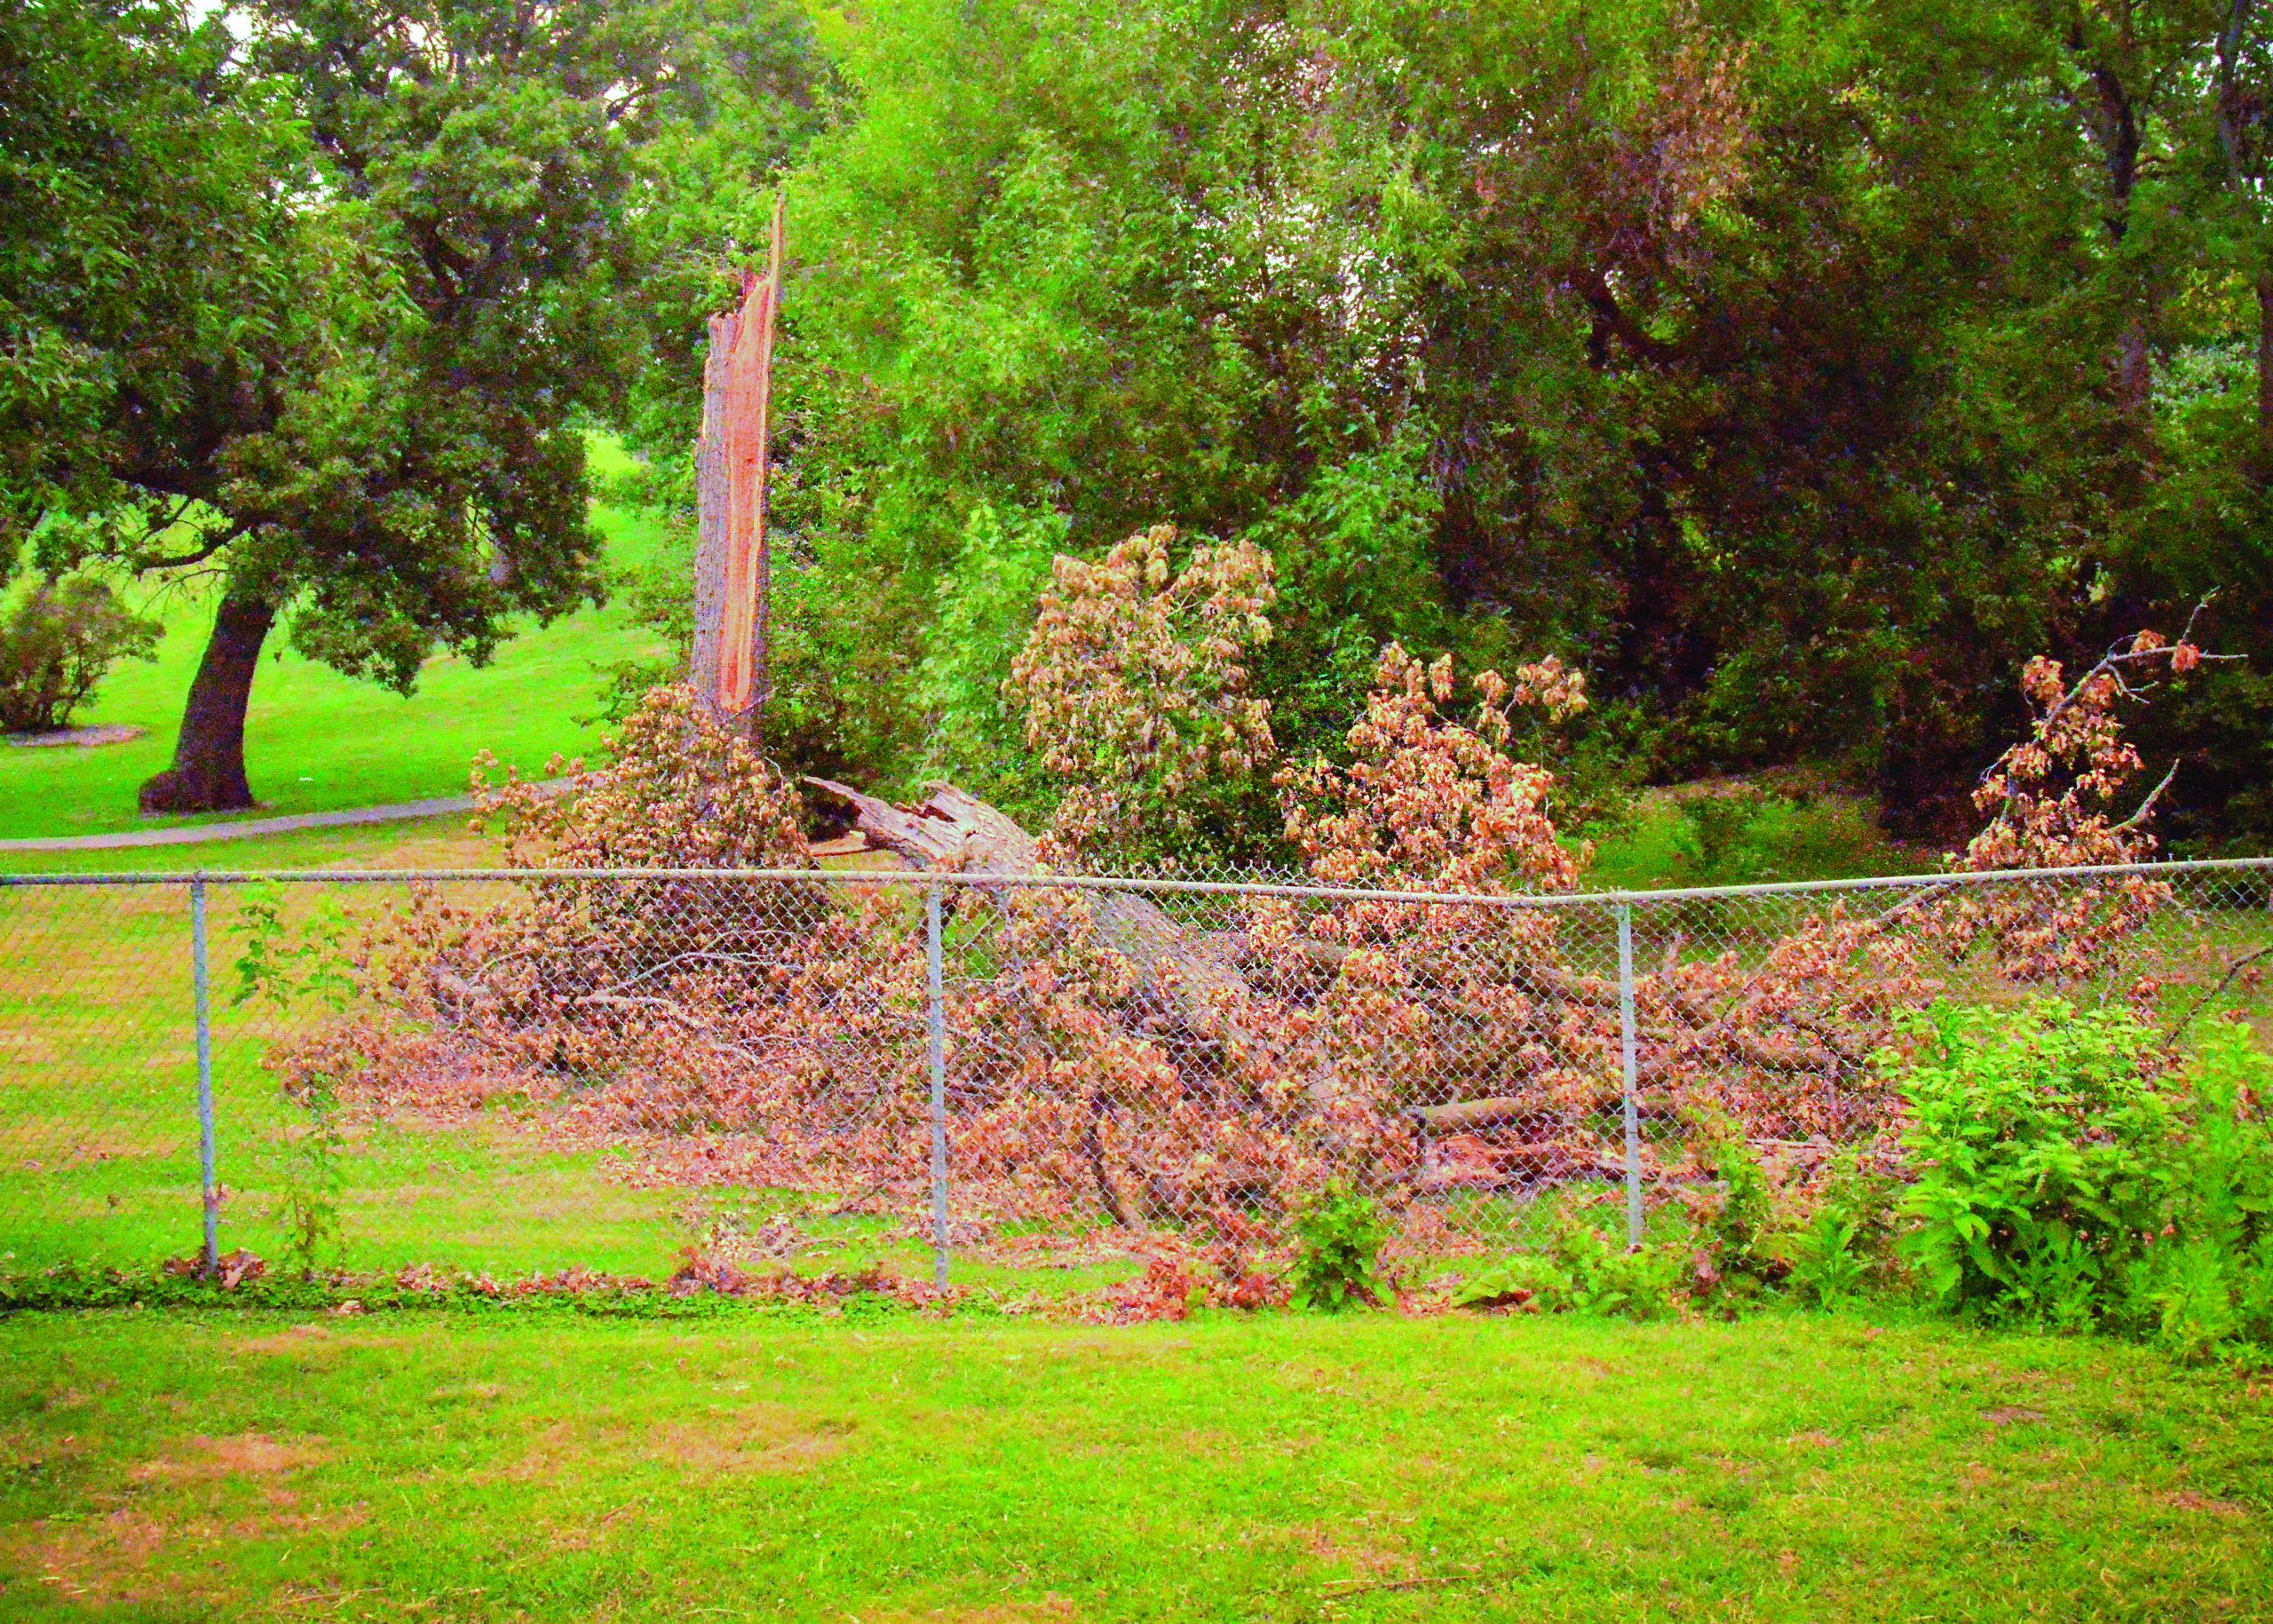 Aftermath of Derecho Storm in Iowa The TimesDelphic